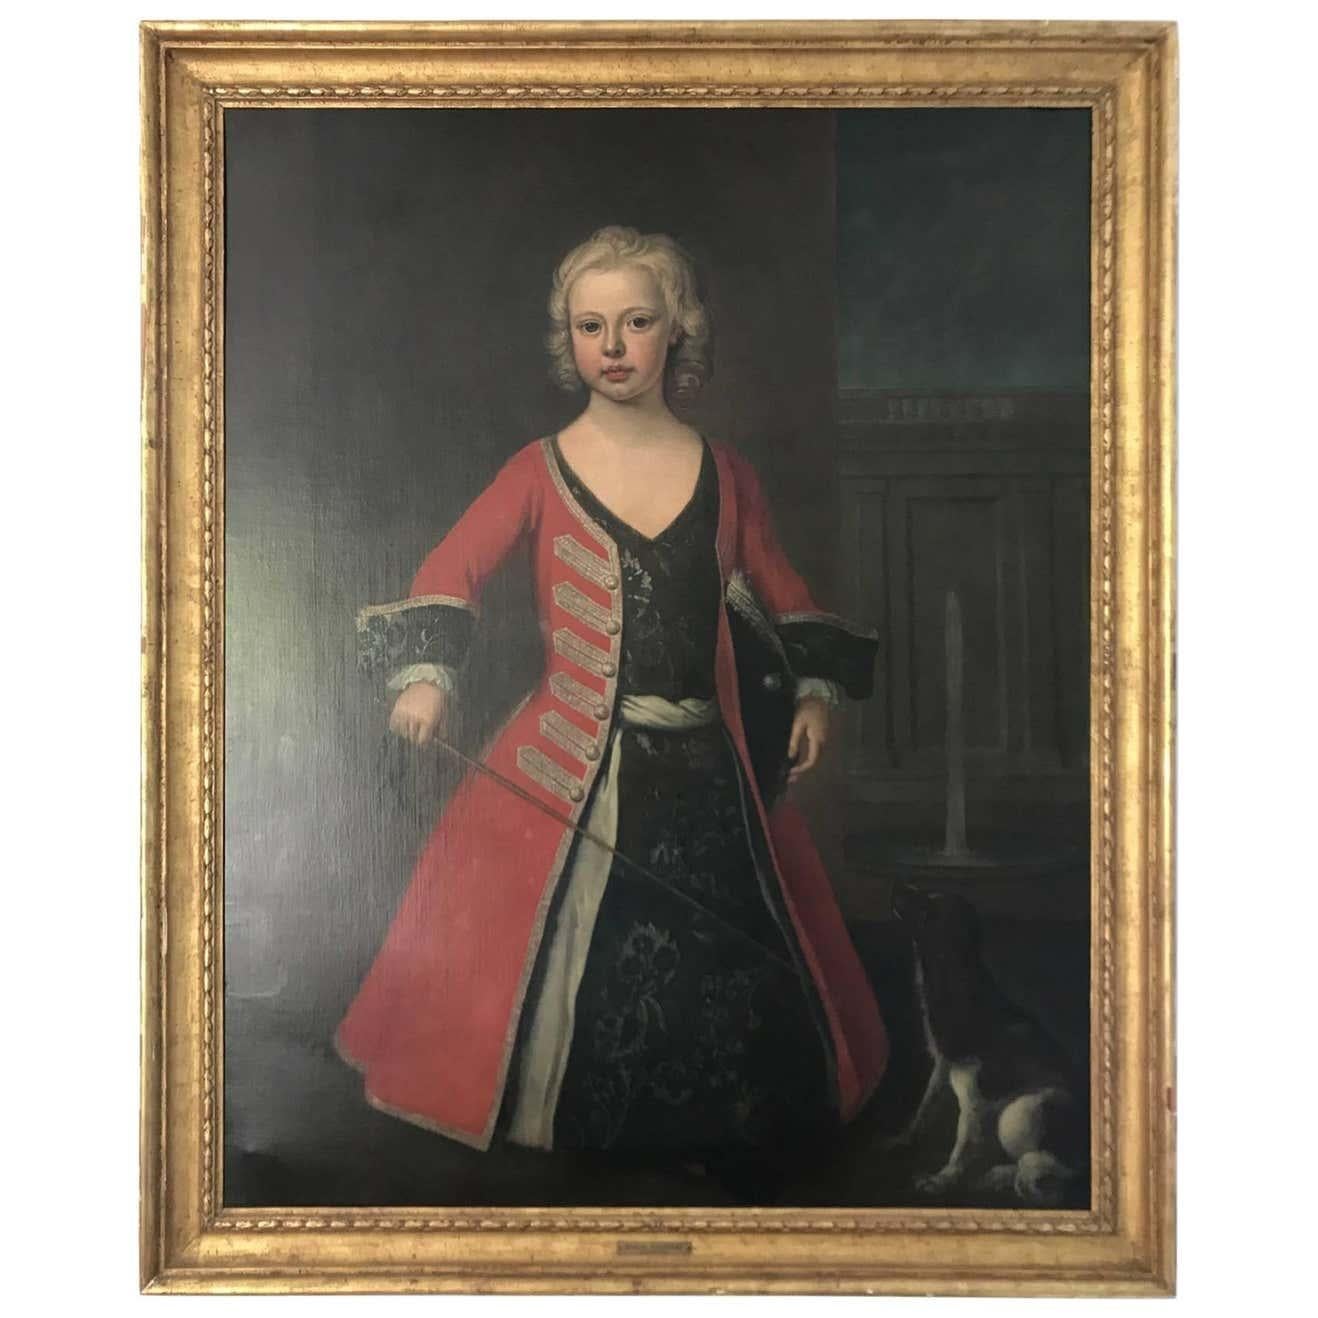 Attributed To Joseph Highmore (1692-1789) 'Portrait of child - possibly Prince William Duke of Cumberland, son of King George II'
Oil on canvas painted by the Joseph Highmore. Depicting William as a young boy, in military dress. He appears to be